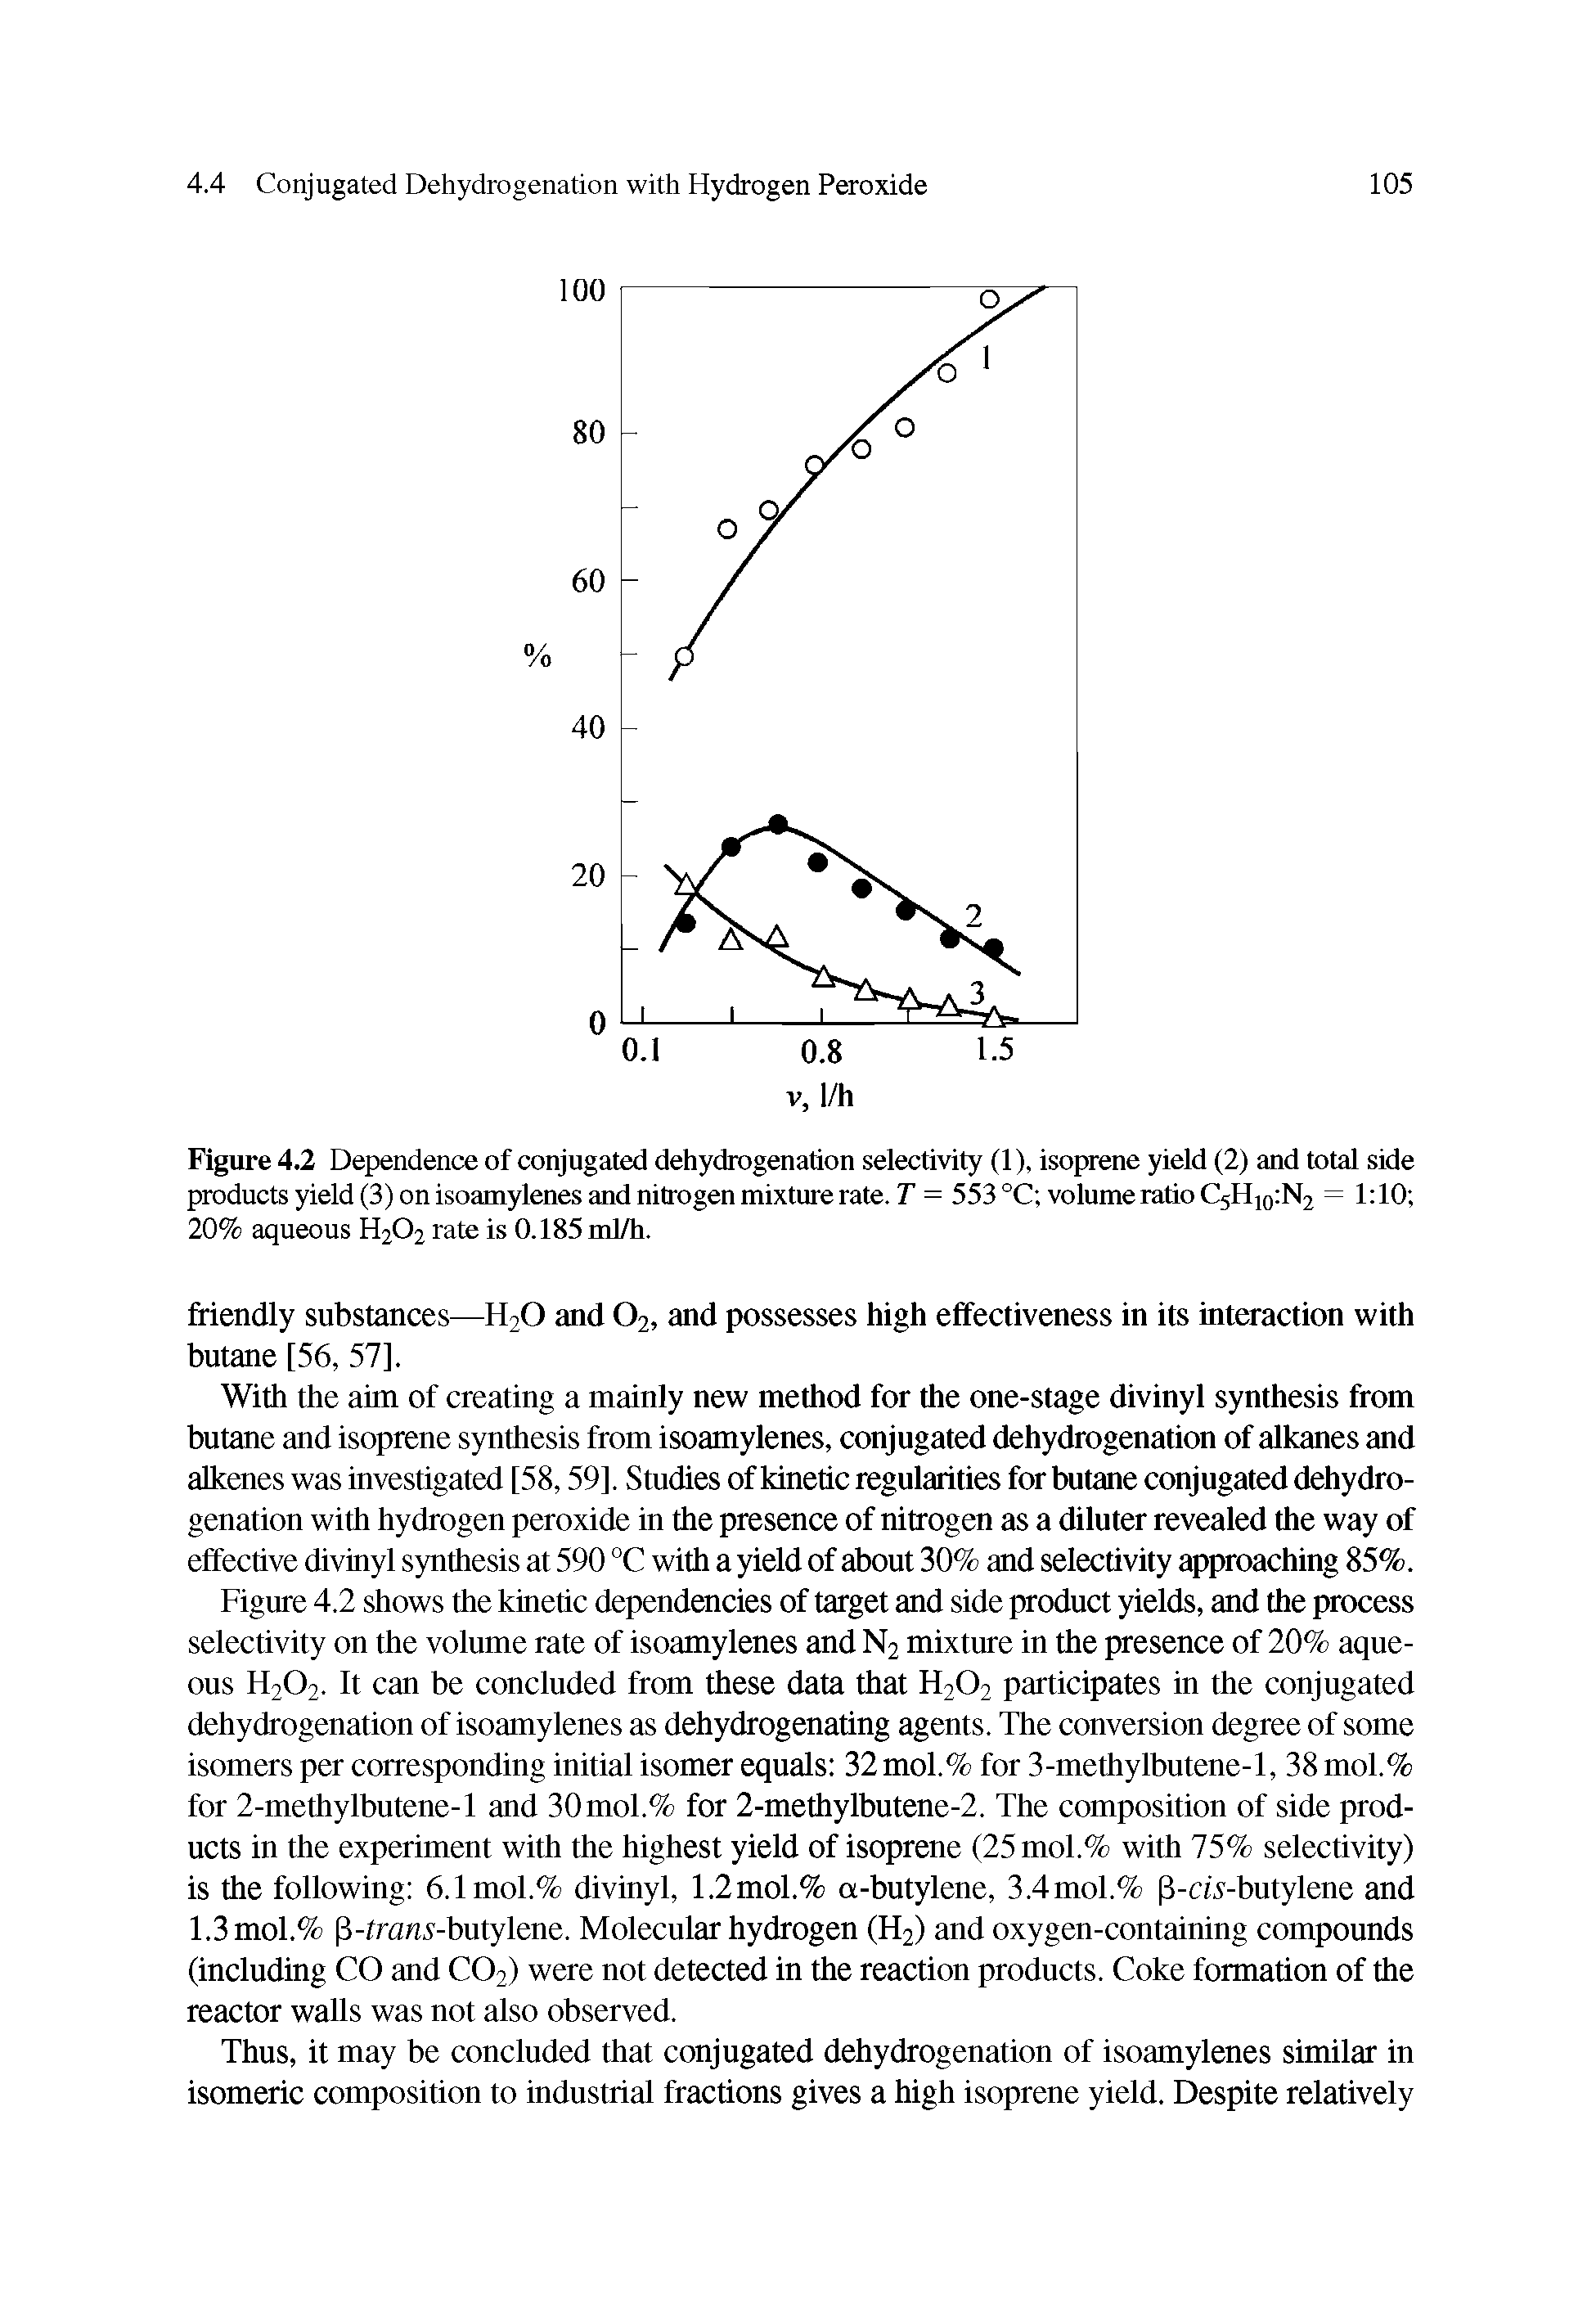 Figure 4.2 Dependence of conjugated dehydrogenation selectivity (1), isoprene yield (2) and total side products yield (3) on isoamylenes and nitrogen mixture rate. T = 553 °C volume ratio C5H1() N2 = 1 10 20% aqueous H202 rate is 0.185 ml/h.